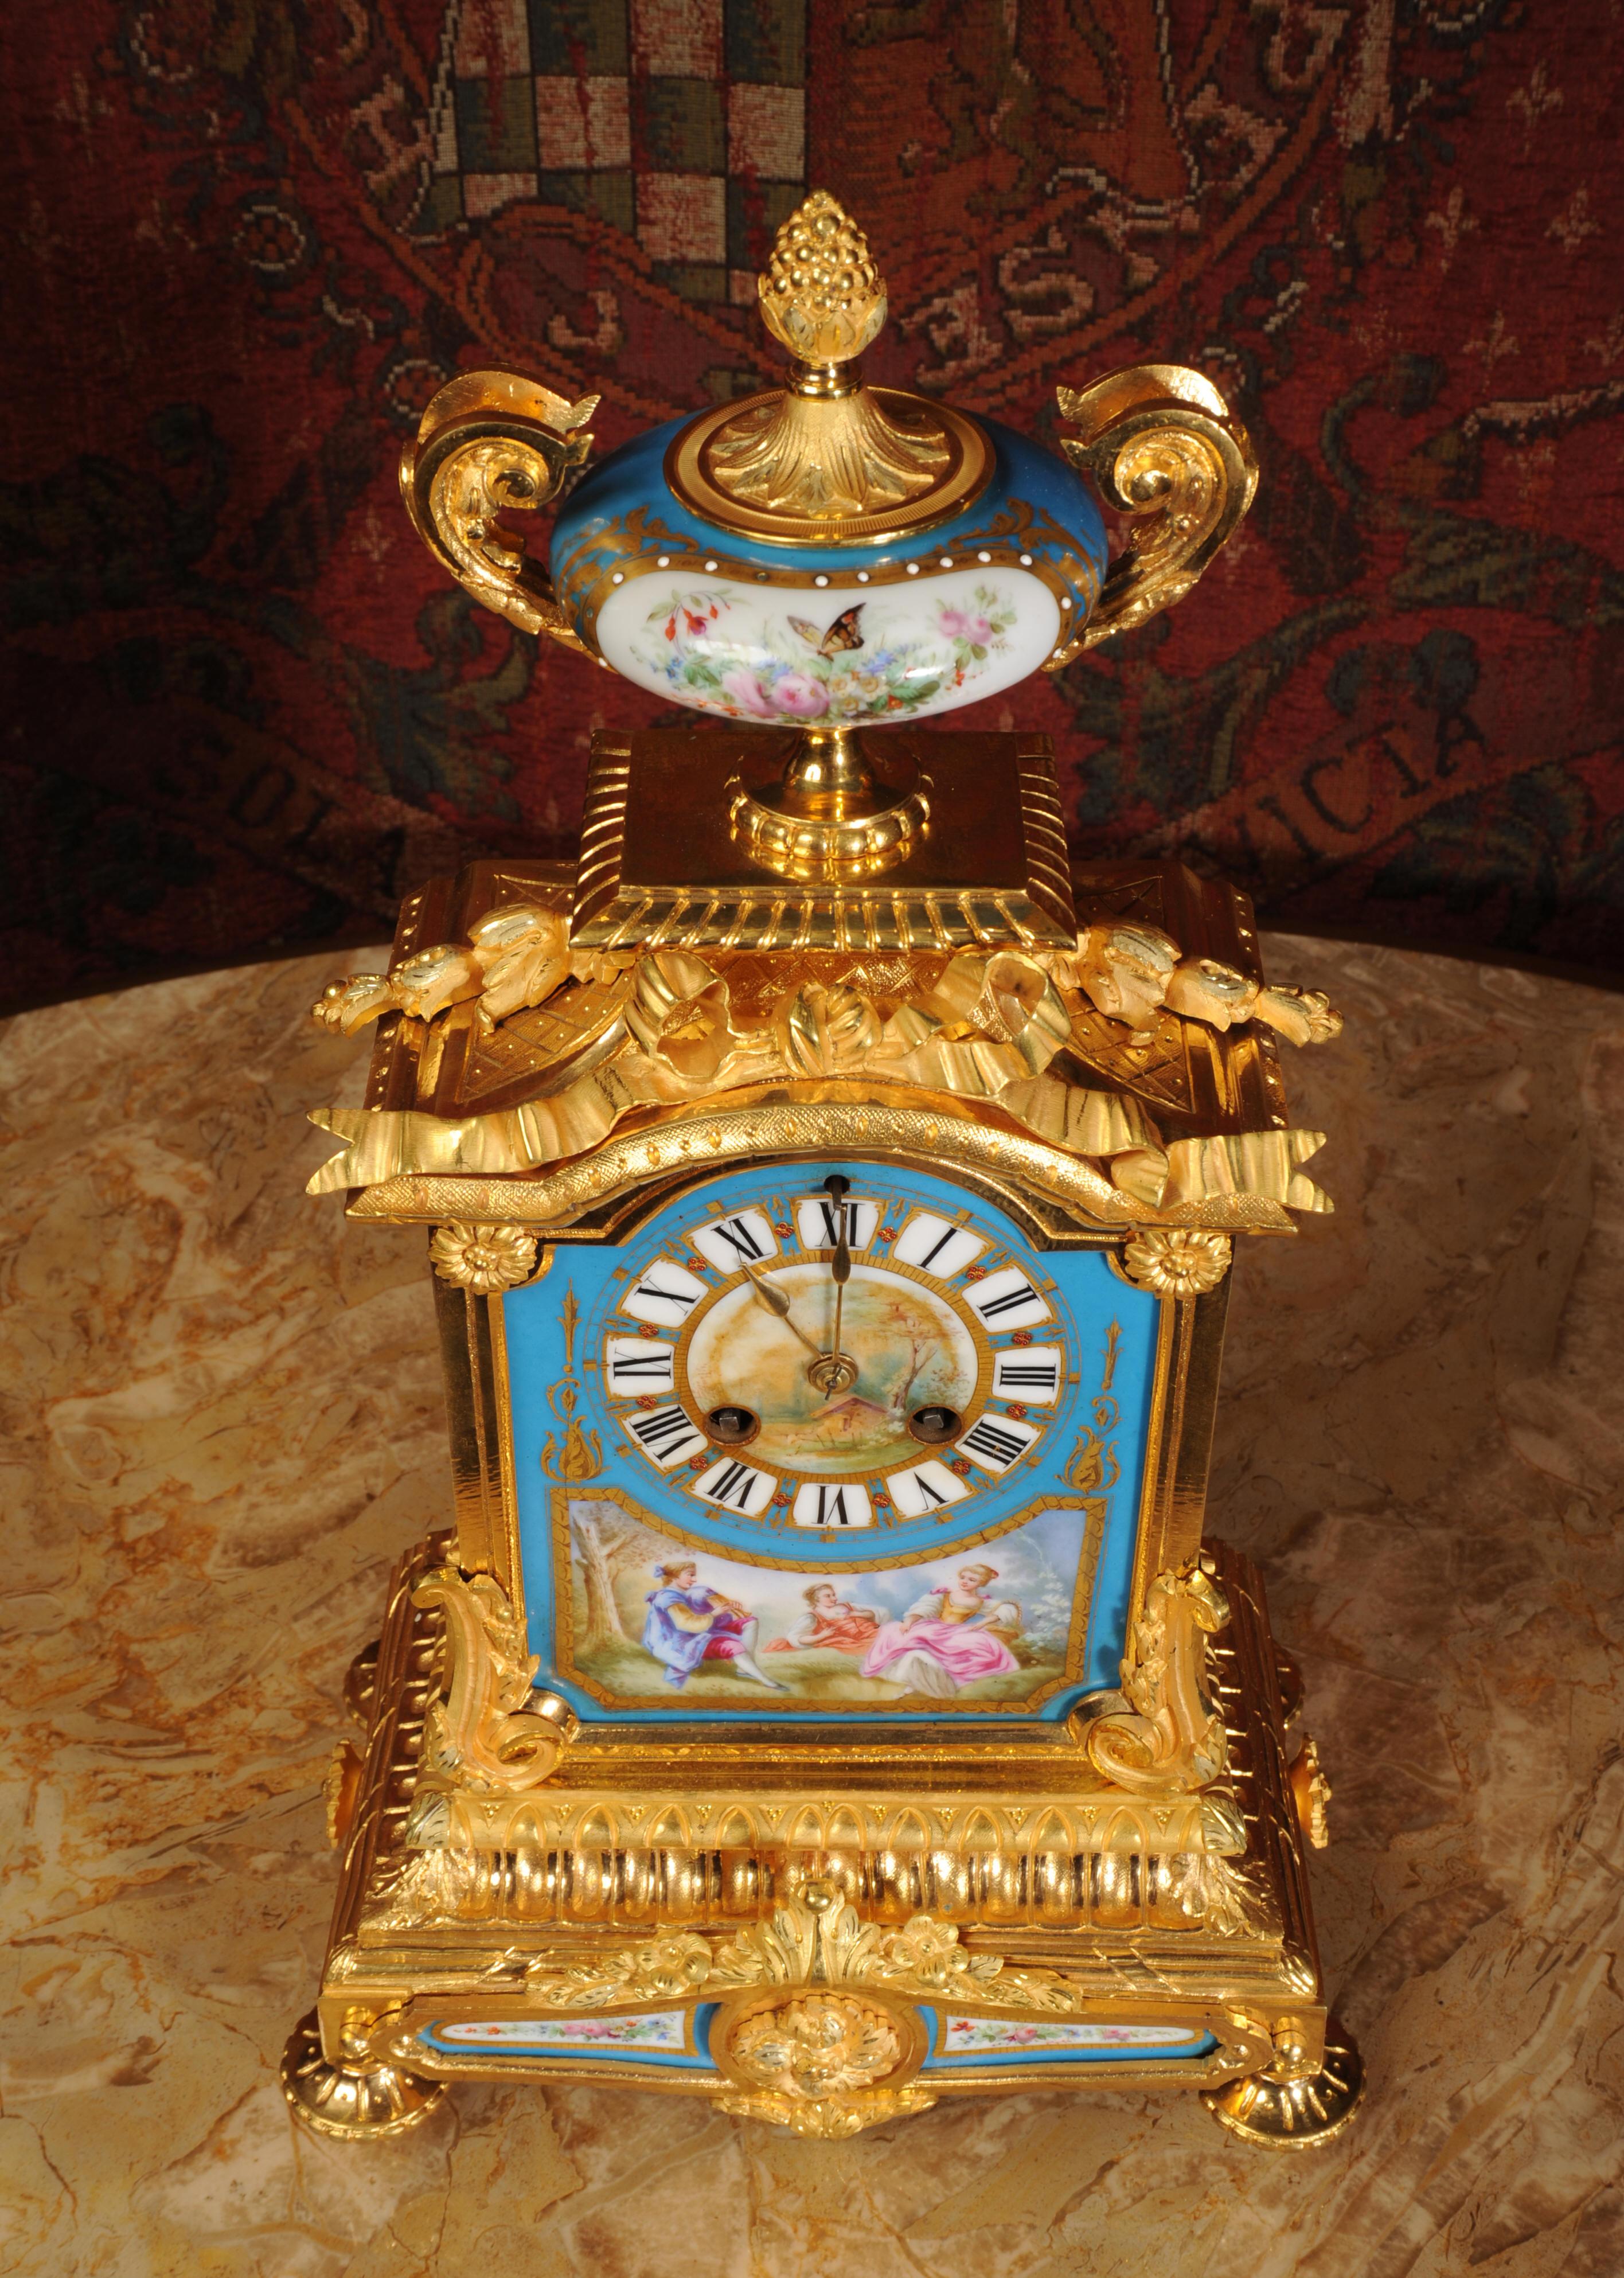 19th Century Ormolu and Sèvres Porcelain Antique French Boudoir Clock by Japy Freres